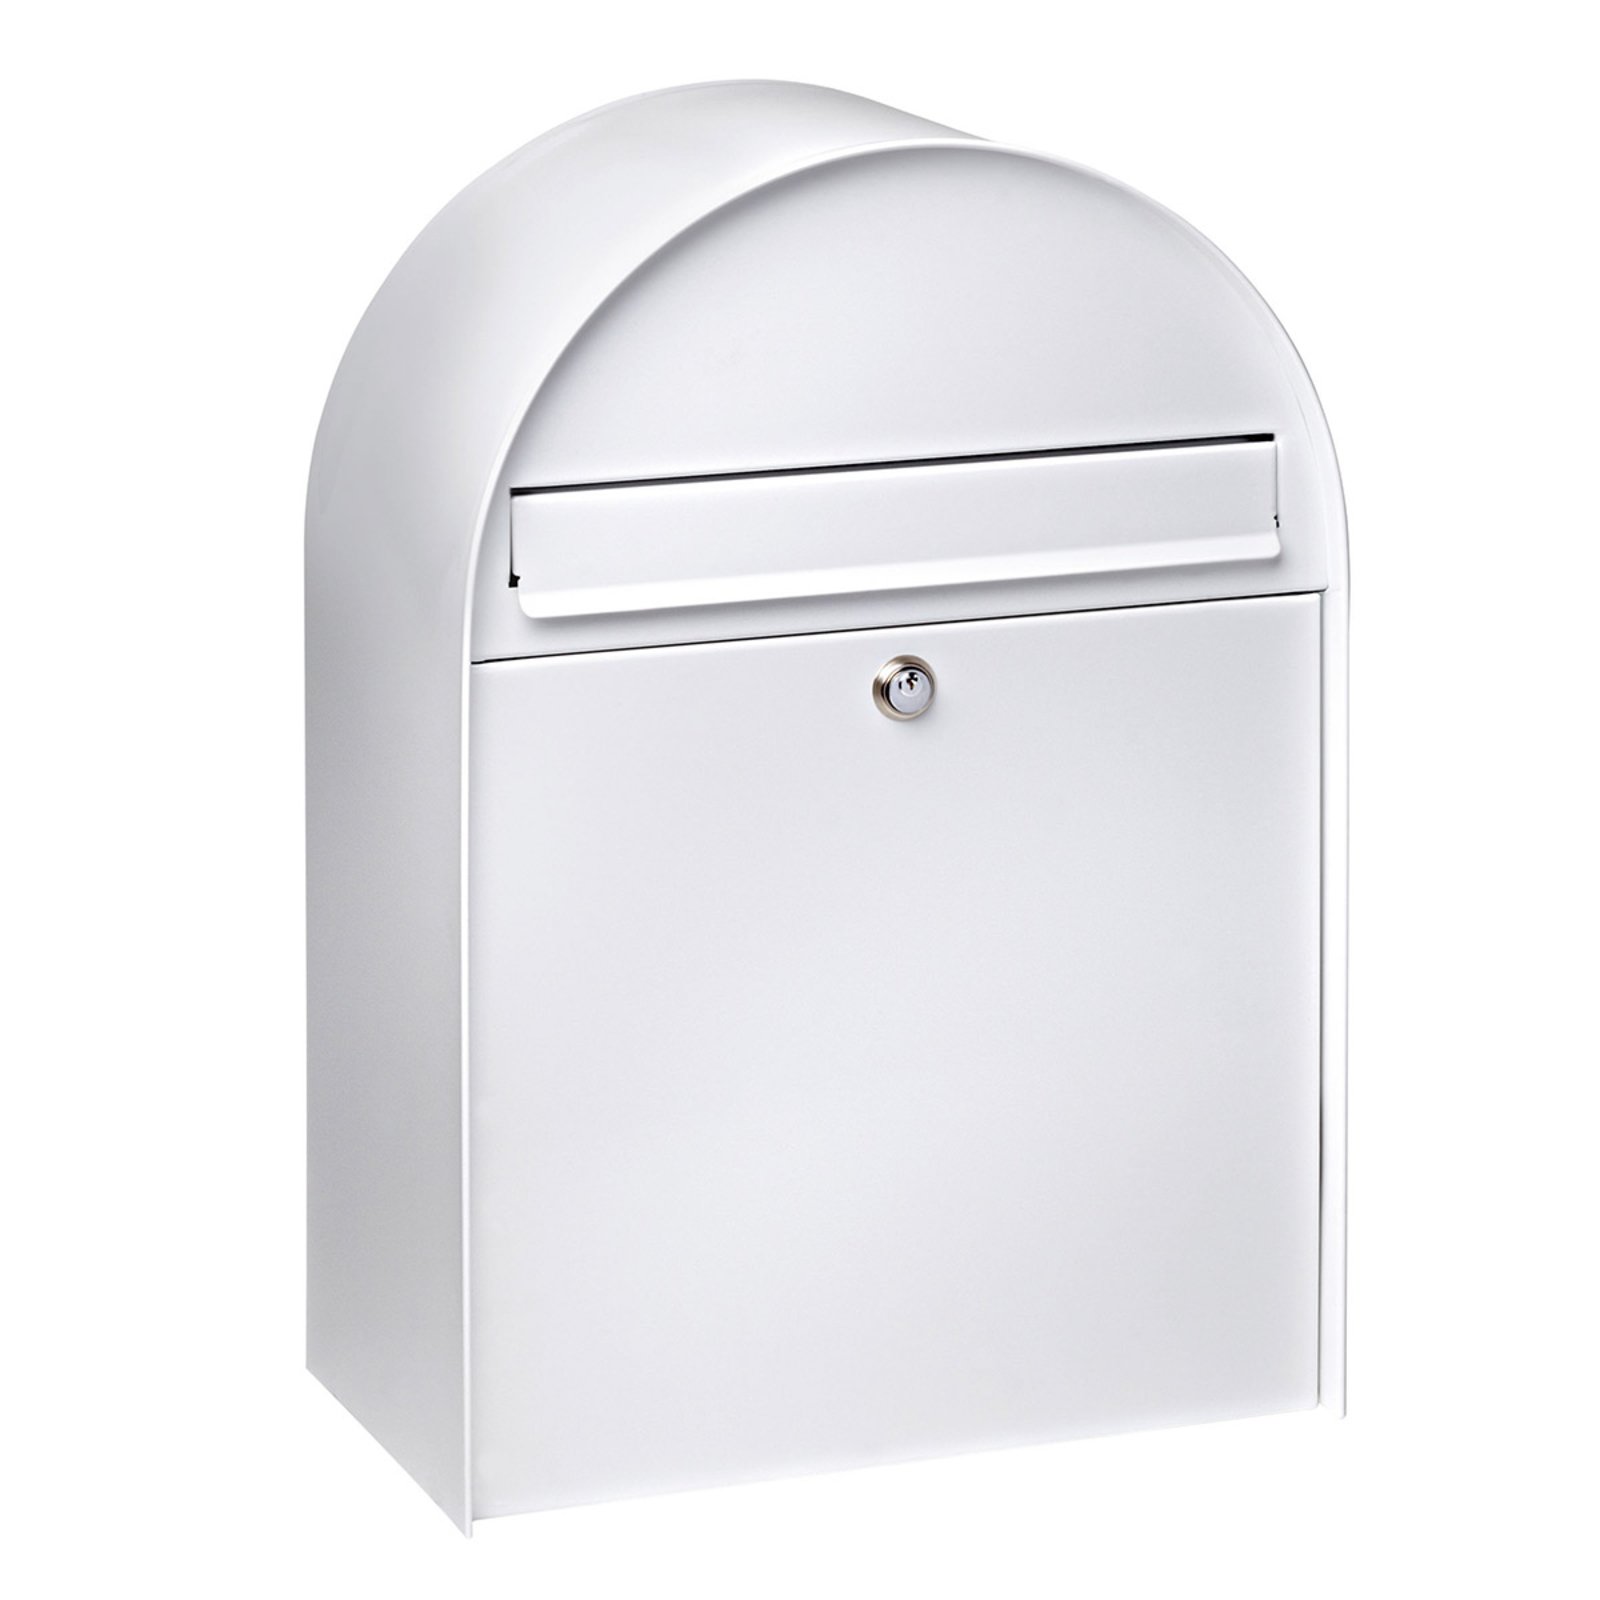 Nordic 780 - large letter box, coated in white